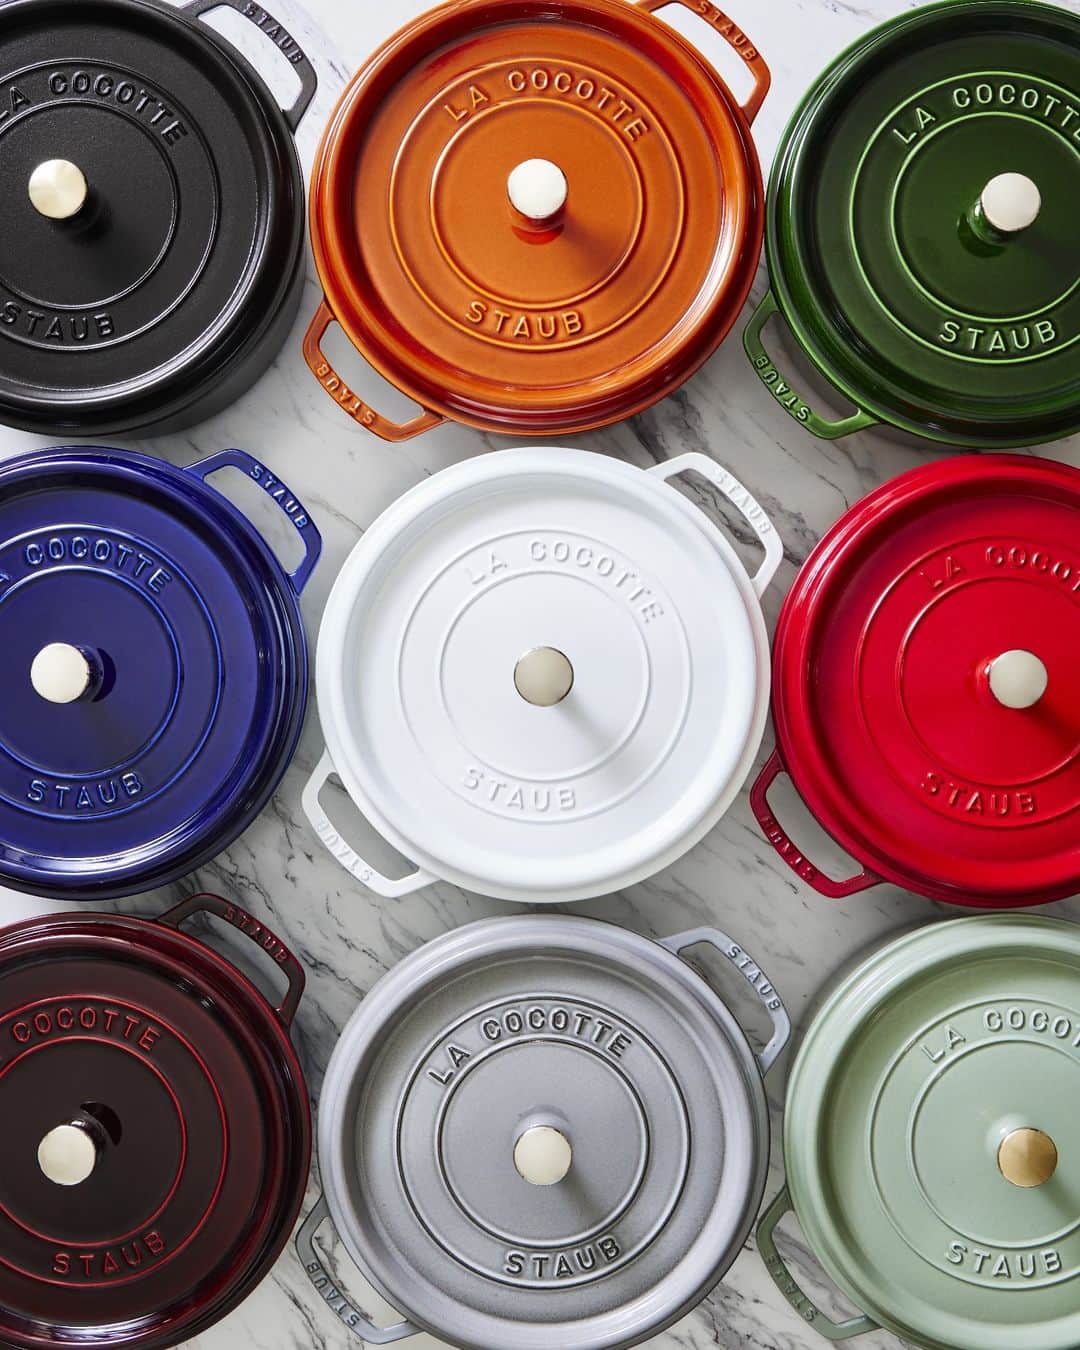 Staub USA（ストウブ）のインスタグラム：「La vie en couleur. Our cocottes are available in a wide range of vibrant hues that are inspired by the natural world, from the latest interior design trends, and from time-tested traditional design aesthetics. We would love to know which STAUB shade is your favorite in the comments below. ❤️ #madeinstaub #castiron」